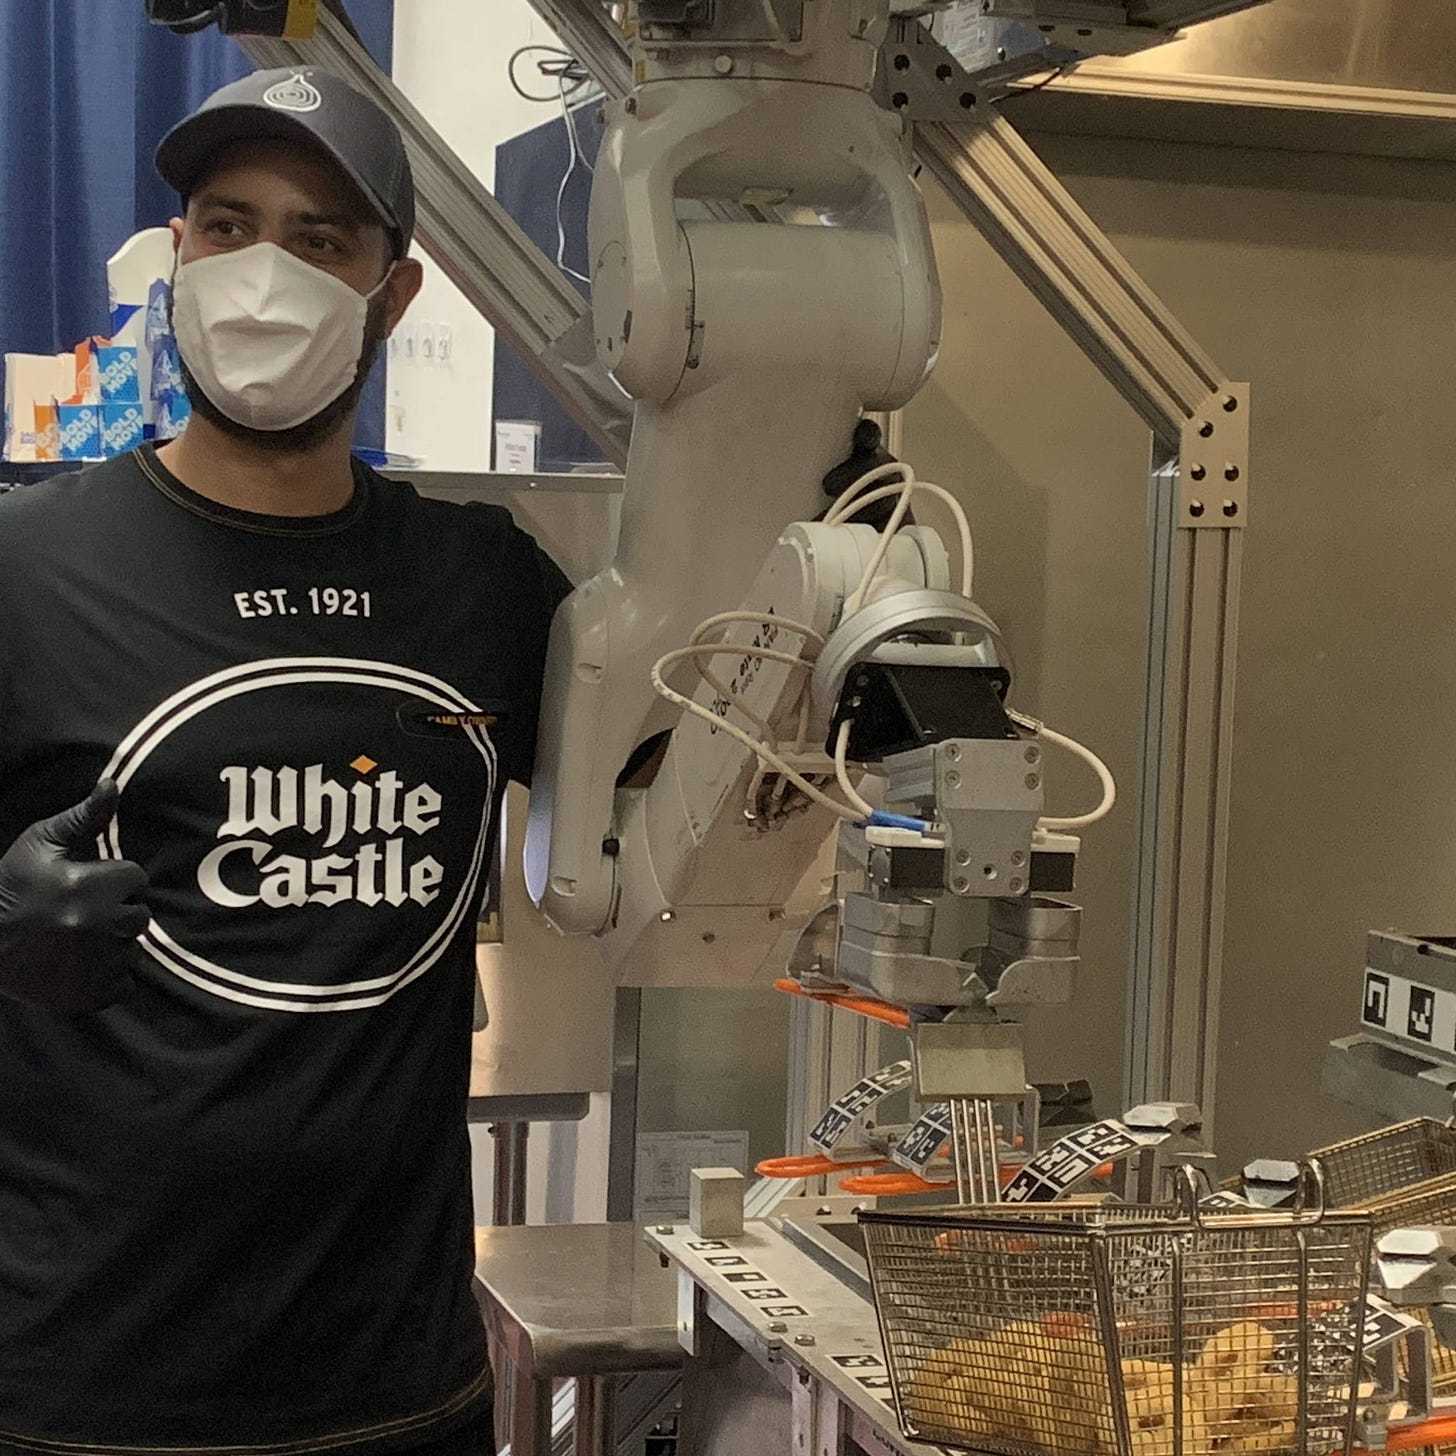 Image result from https://fitoresendiz.com/white-castle-becomes-the-first-fast-food-chain-to-test-out-the-robot-fry-cook-flippy-from-miso-robotics/white-castle-becomes-the-first-fast-food-chain-to-test-out-the-robot-fry-cook-flippy-from-miso-robotics-2/